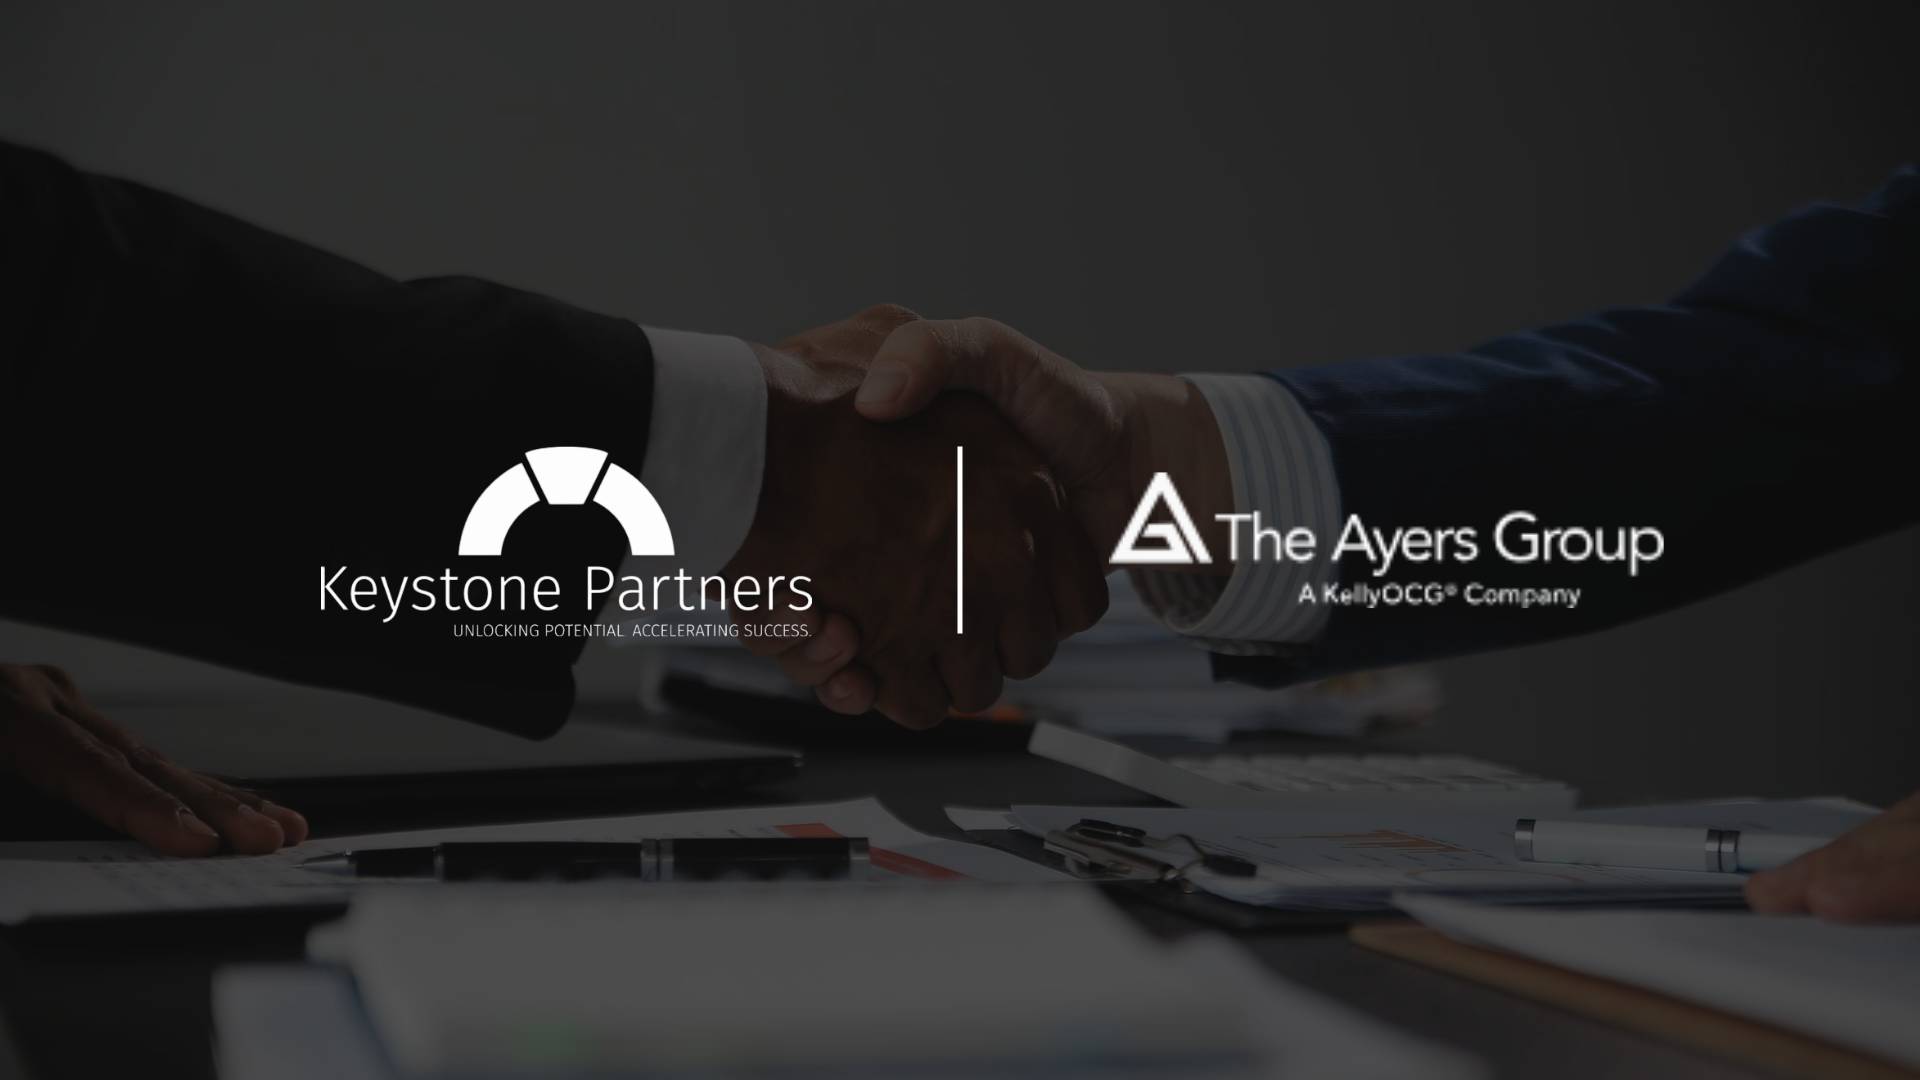 Keystone Partners Acquires The Ayers Group to Expand Leadership Development and Outplacement Services